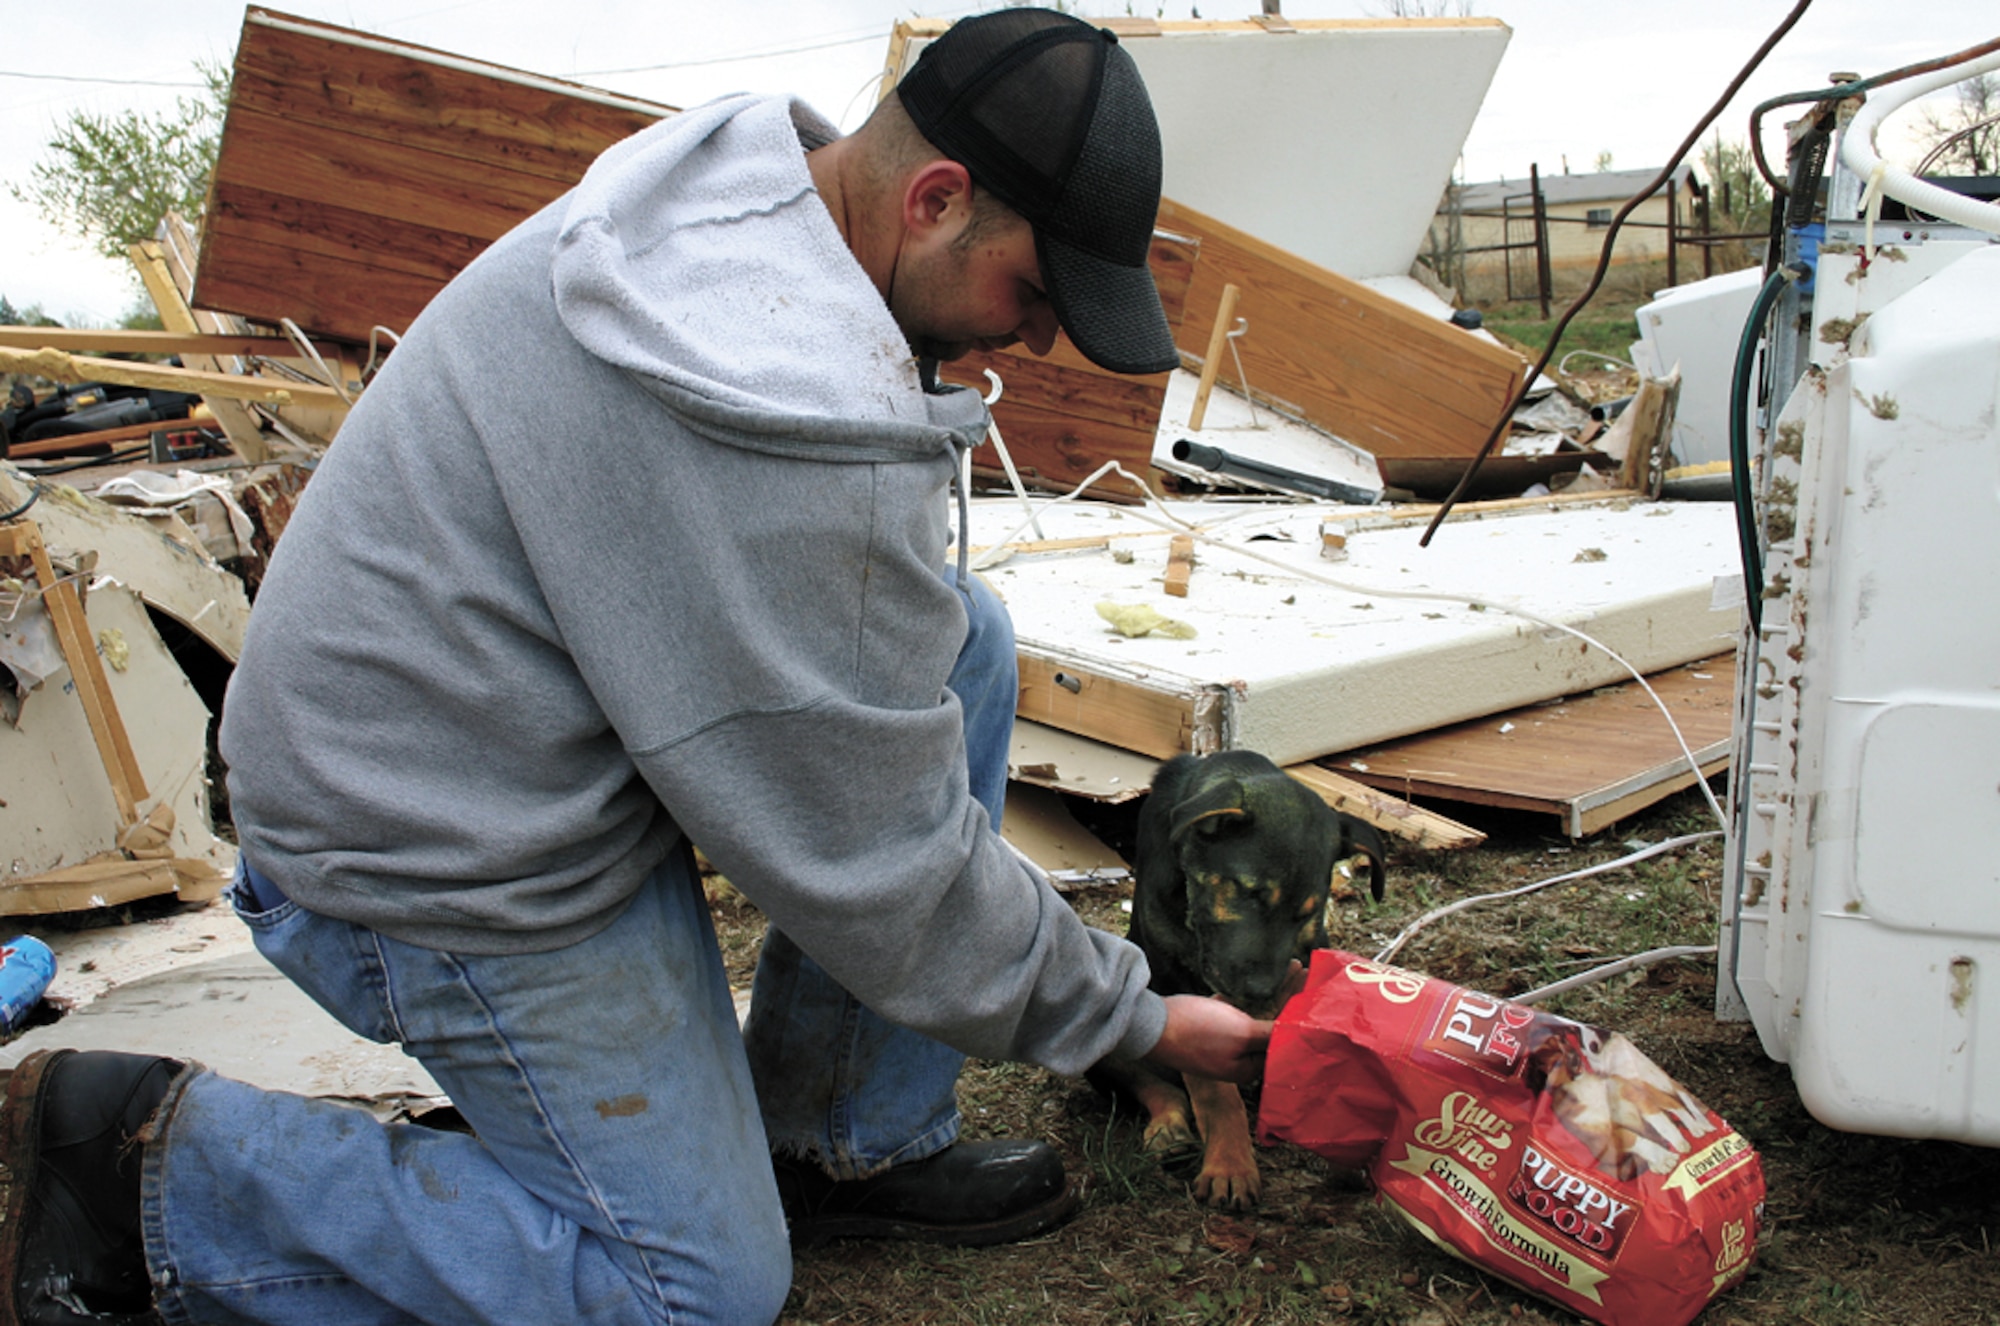 CANNON AIR FORCE BASE, N.M. -- Staff Sgt. Obed Brown, 27th Component Maintenance Squadron, feeds a dog made stray by a tornado that struck Clovis, N.M., March 23. More than 500 volunteers began restoring Clovis, located 6 miles east of Cannon AFB, after tornadoes swept through the town March 23. (U.S. Air Force photo/2nd Lt. George Tobias)